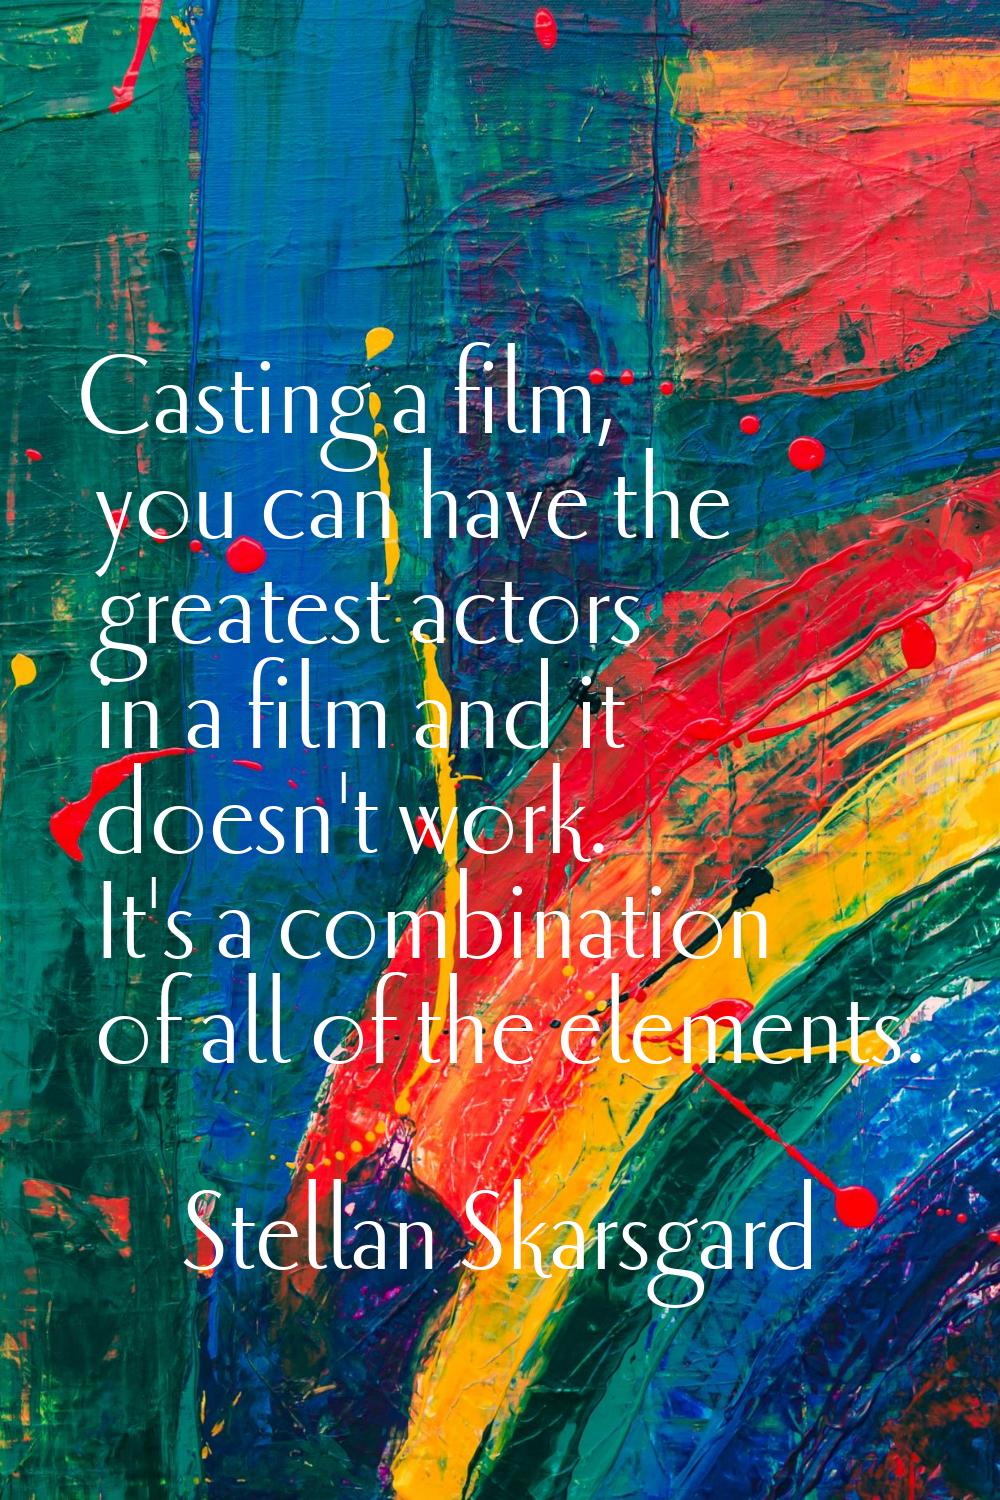 Casting a film, you can have the greatest actors in a film and it doesn't work. It's a combination 